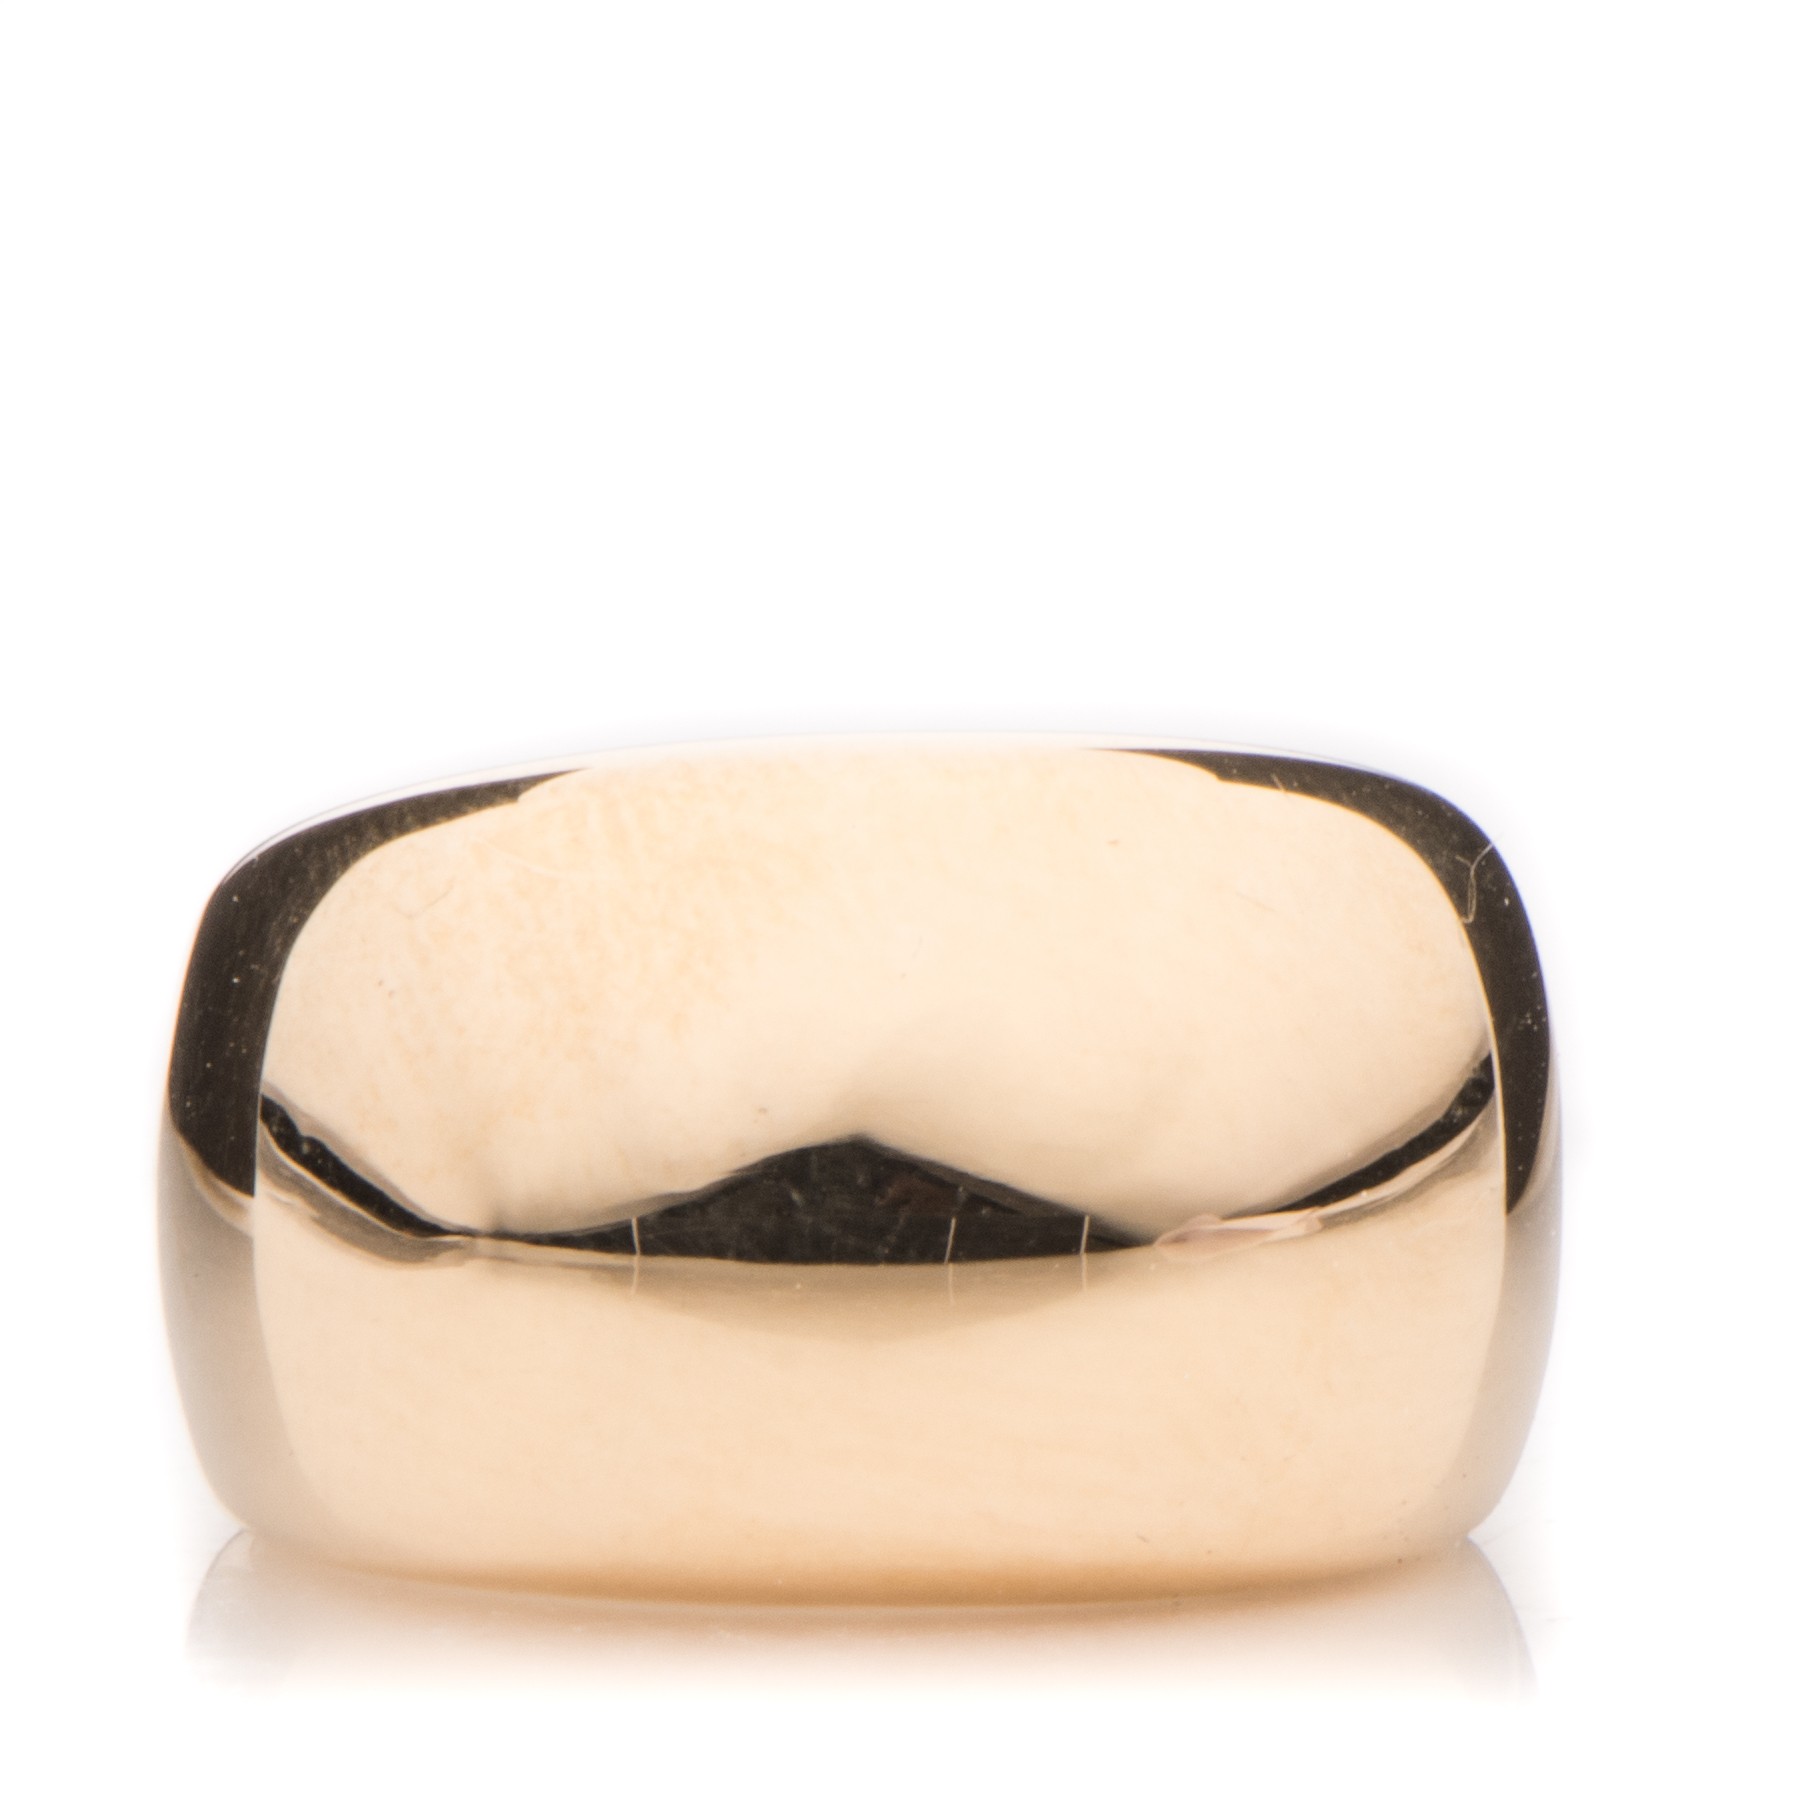 cartier dome ring